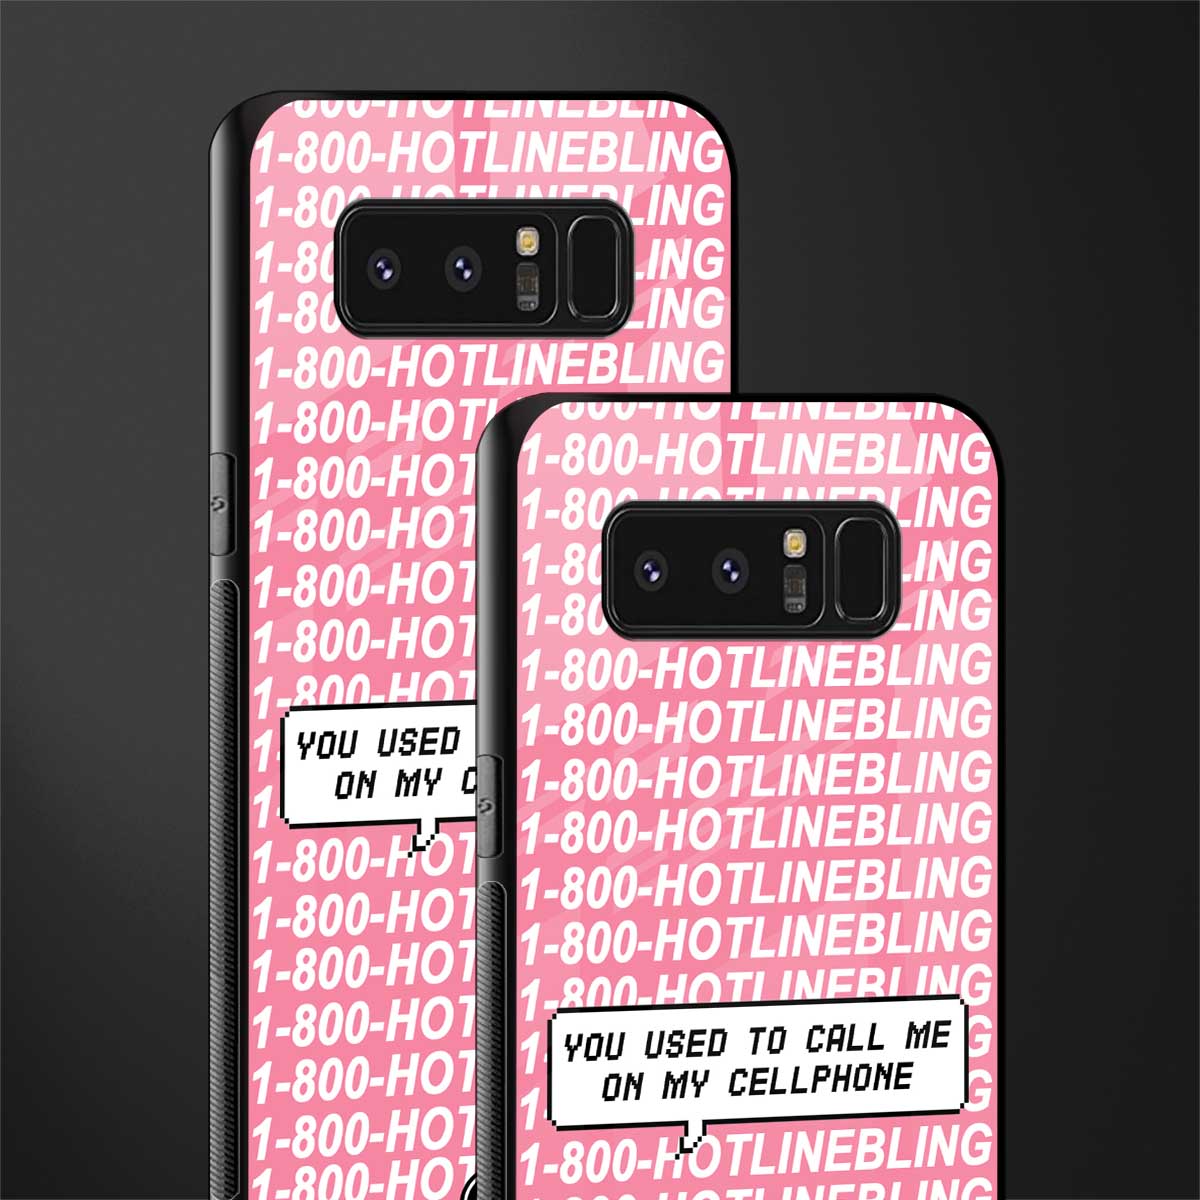 1800 hotline bling phone cover for samsung galaxy note 8 